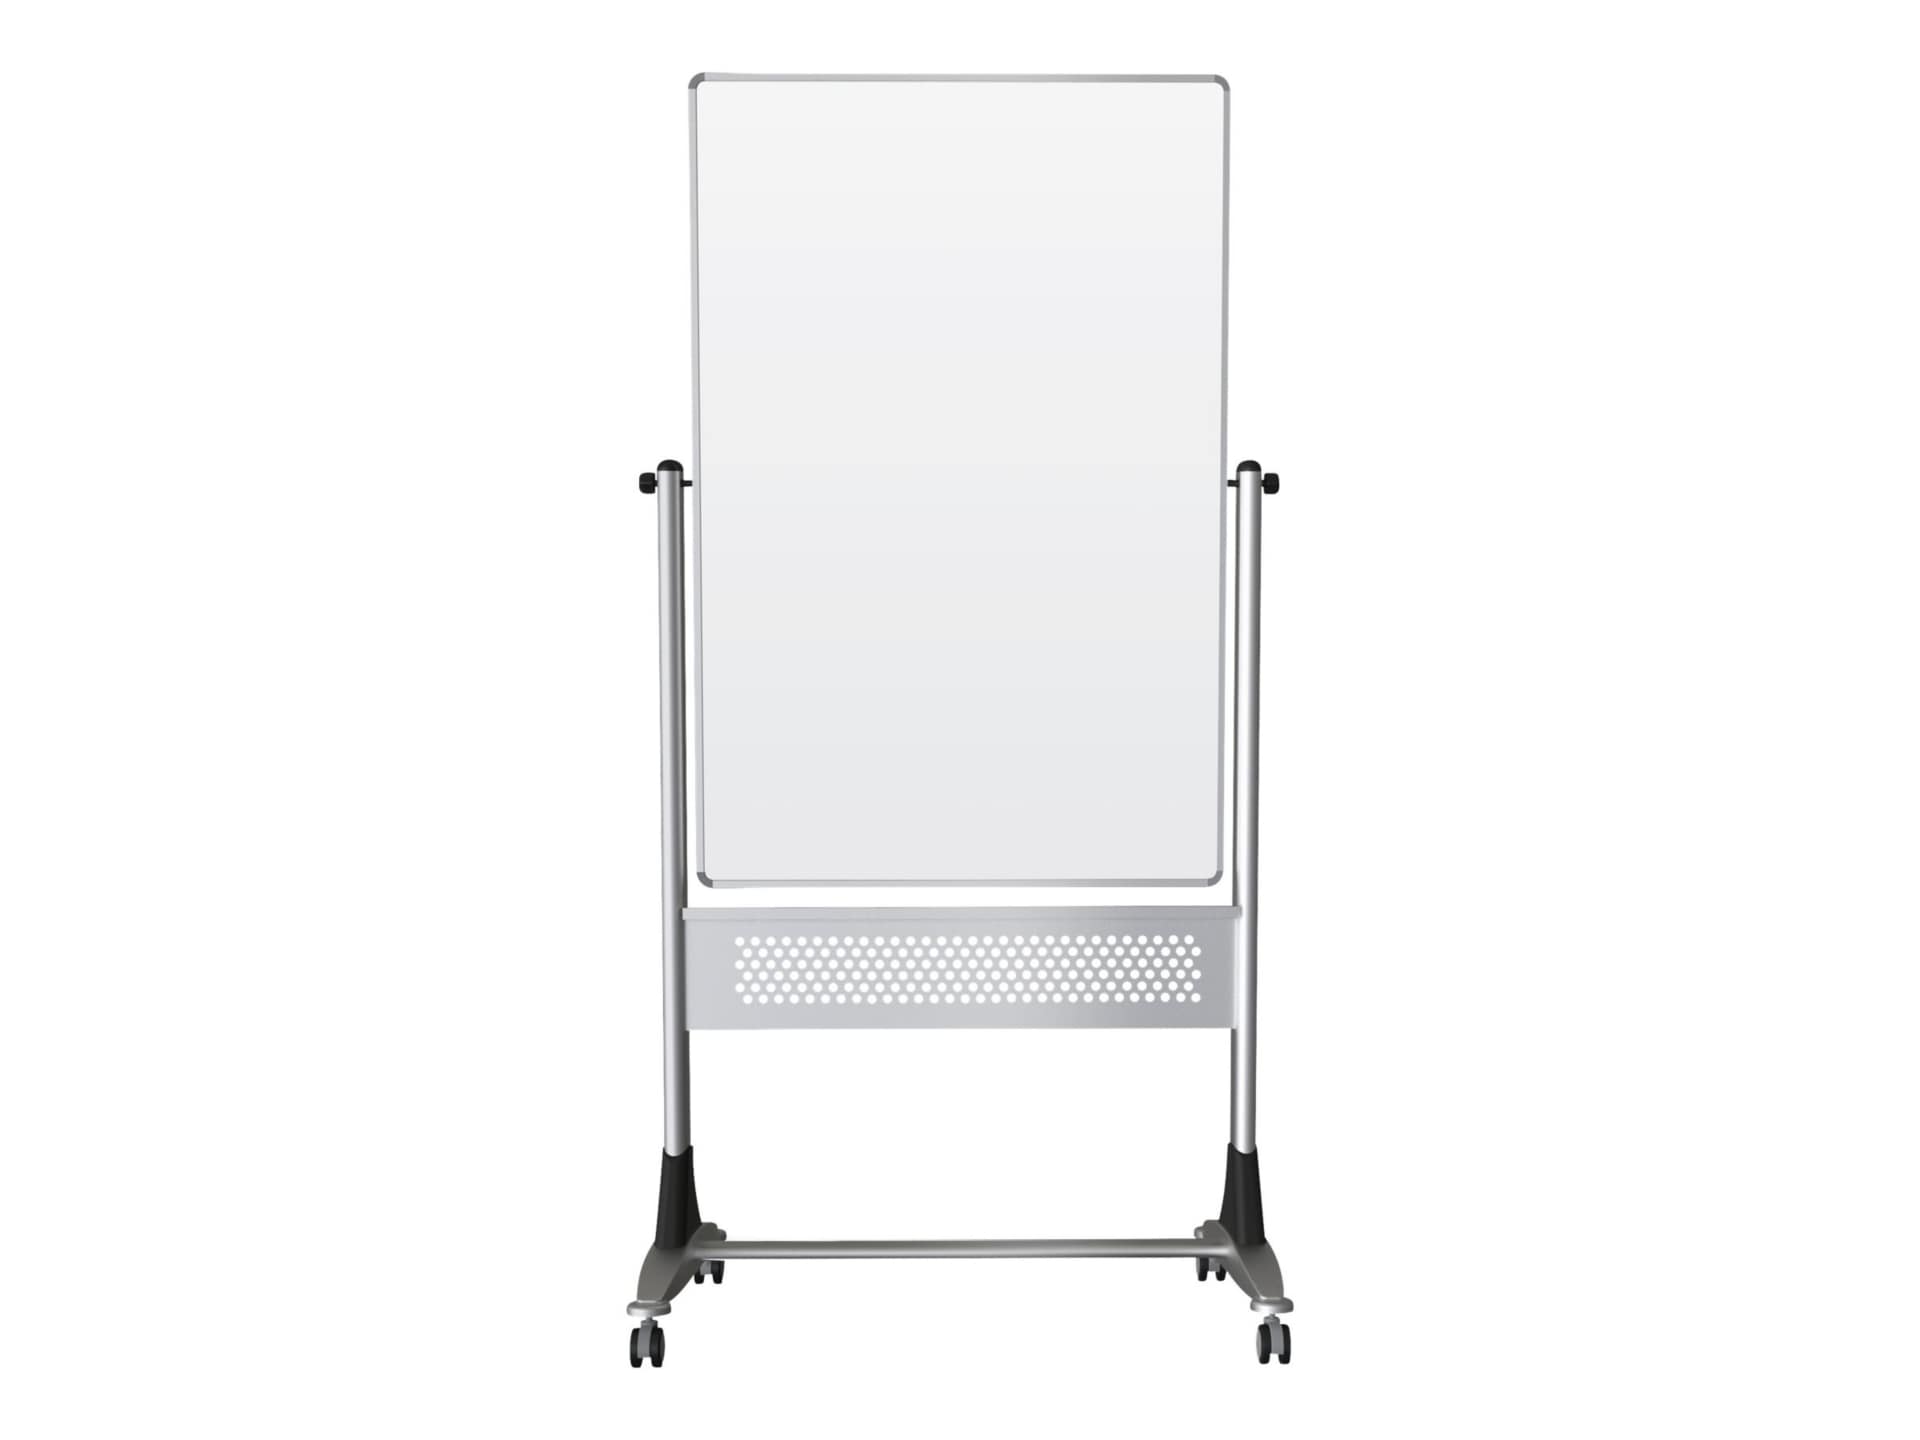 MooreCo Platinum whiteboard - 30 in x 40 in - double-sided